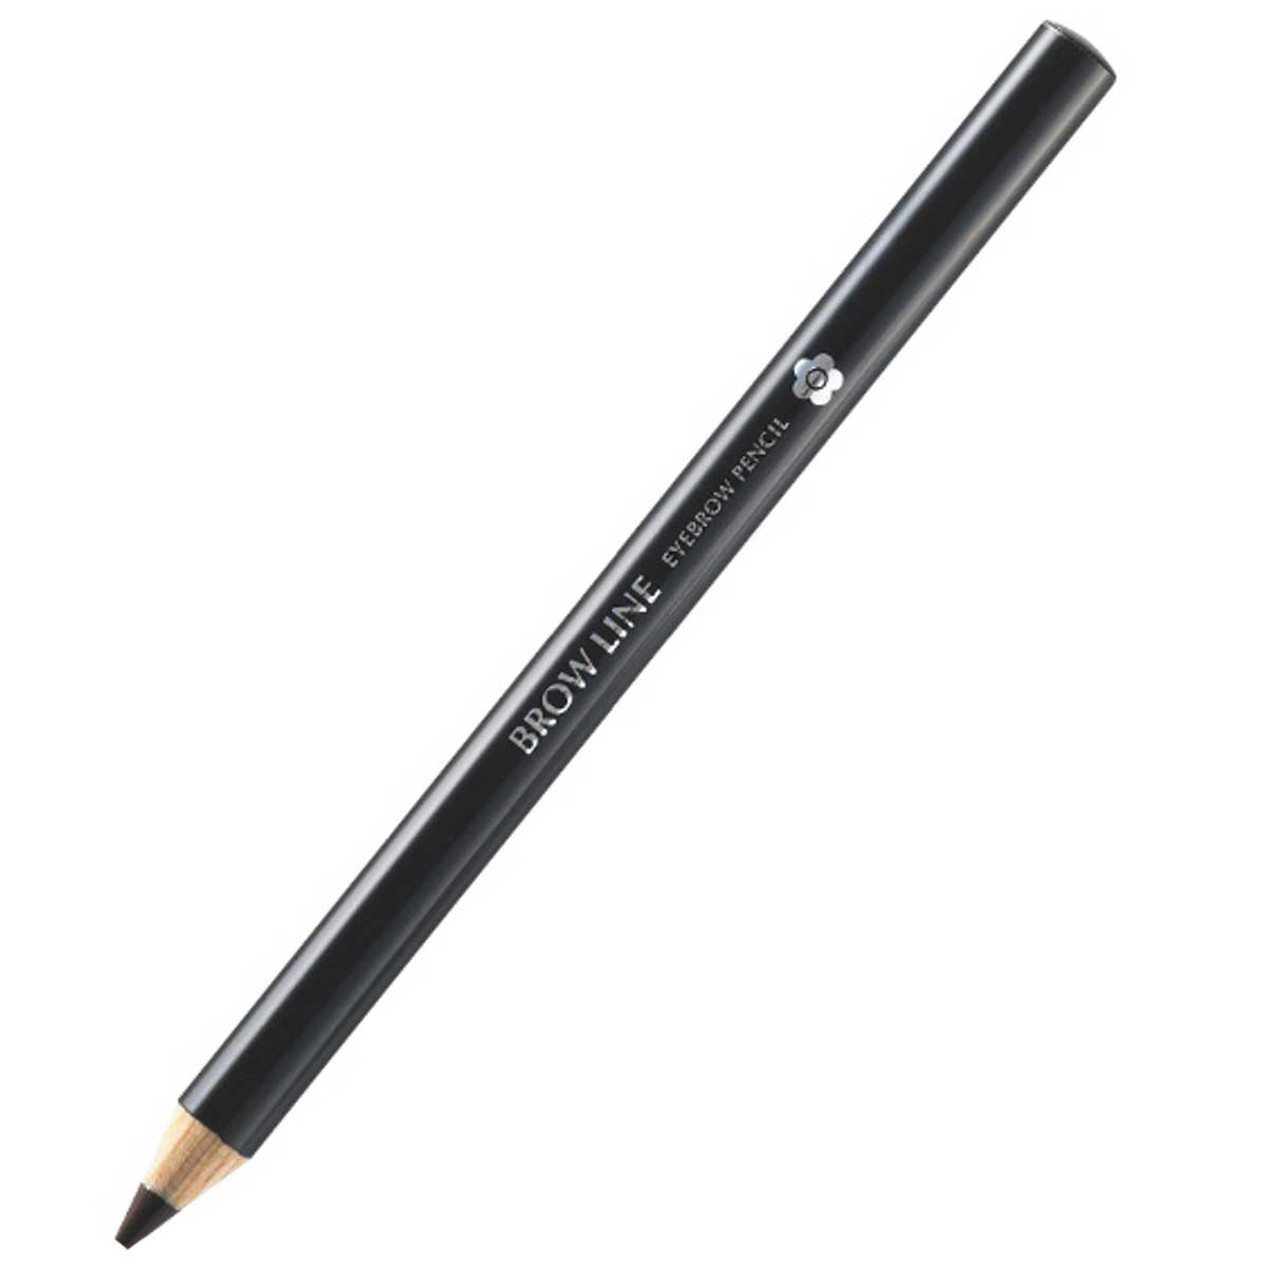 An eyebrow pencil with Mary Quant Brow line and the Mary Quant Daisy printed on.